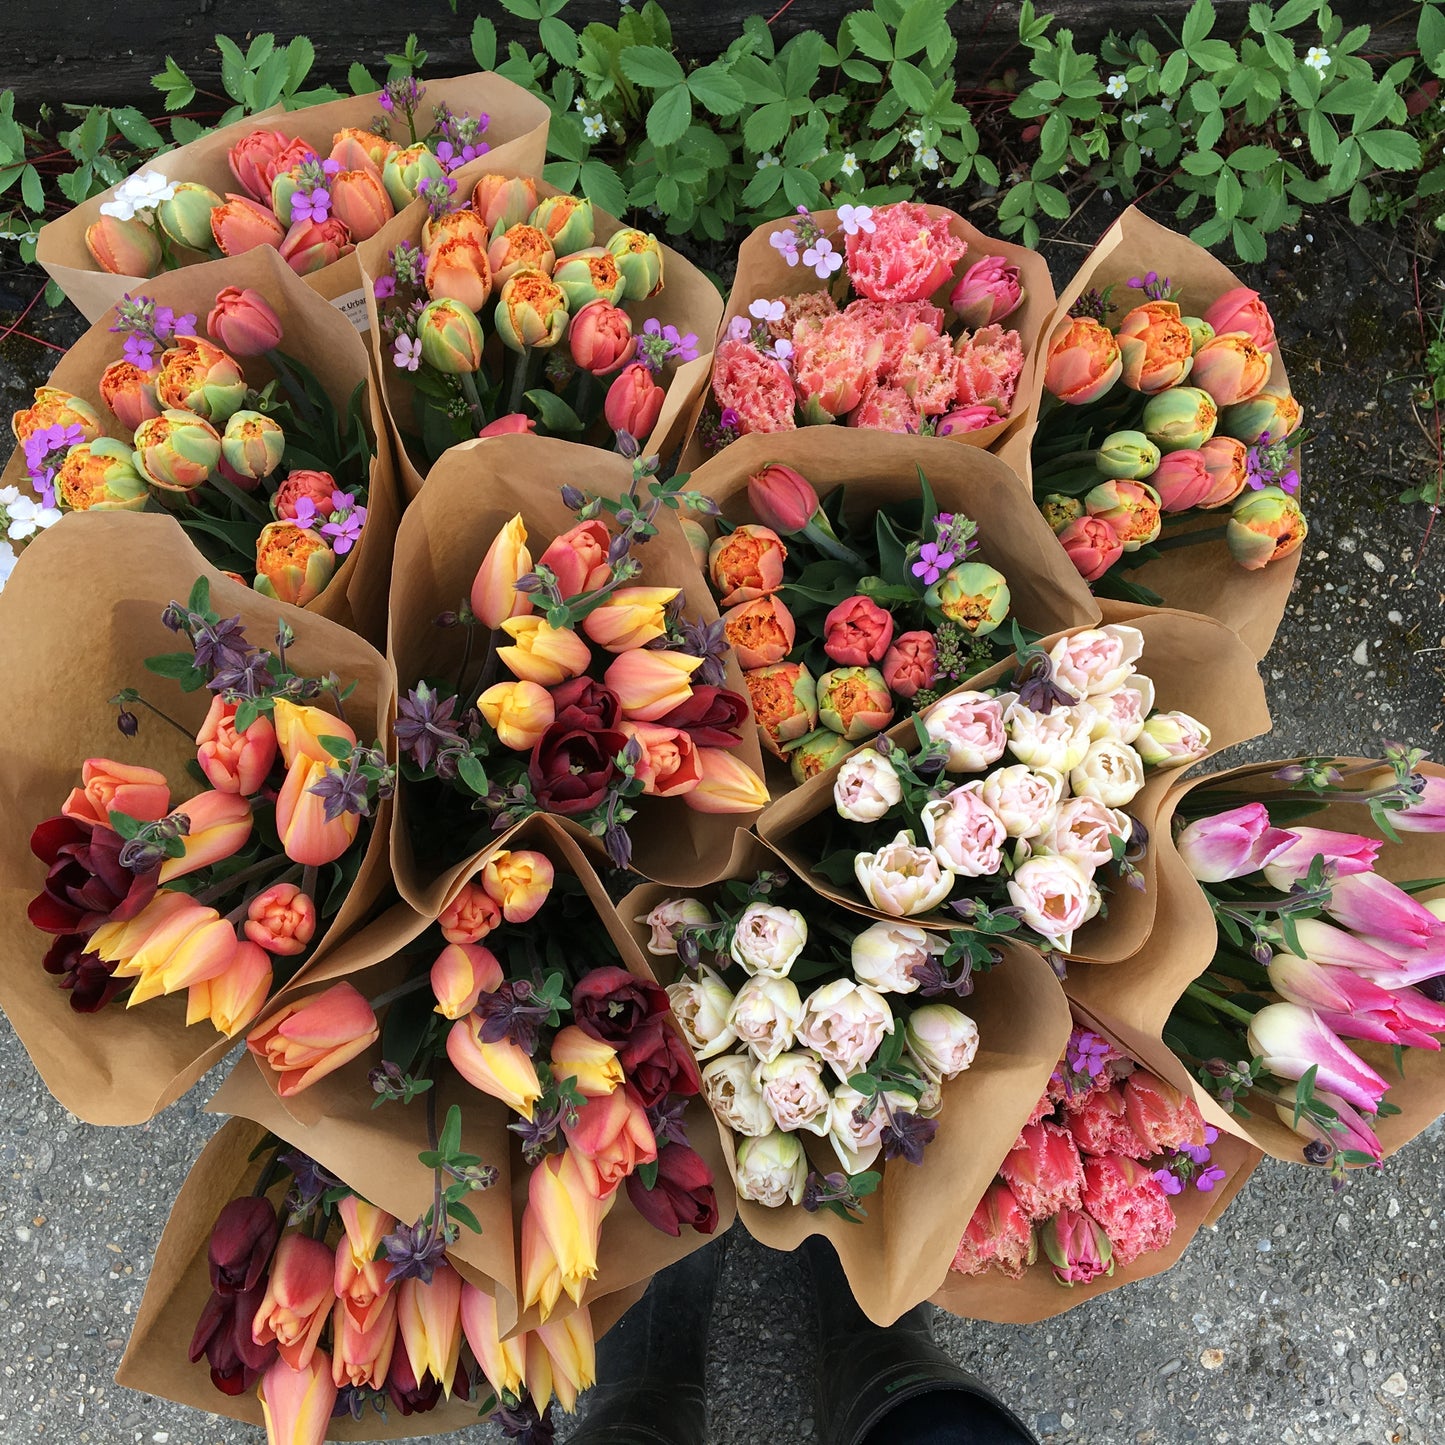 1. Spring Flower Subscription,        May 14 - June 4